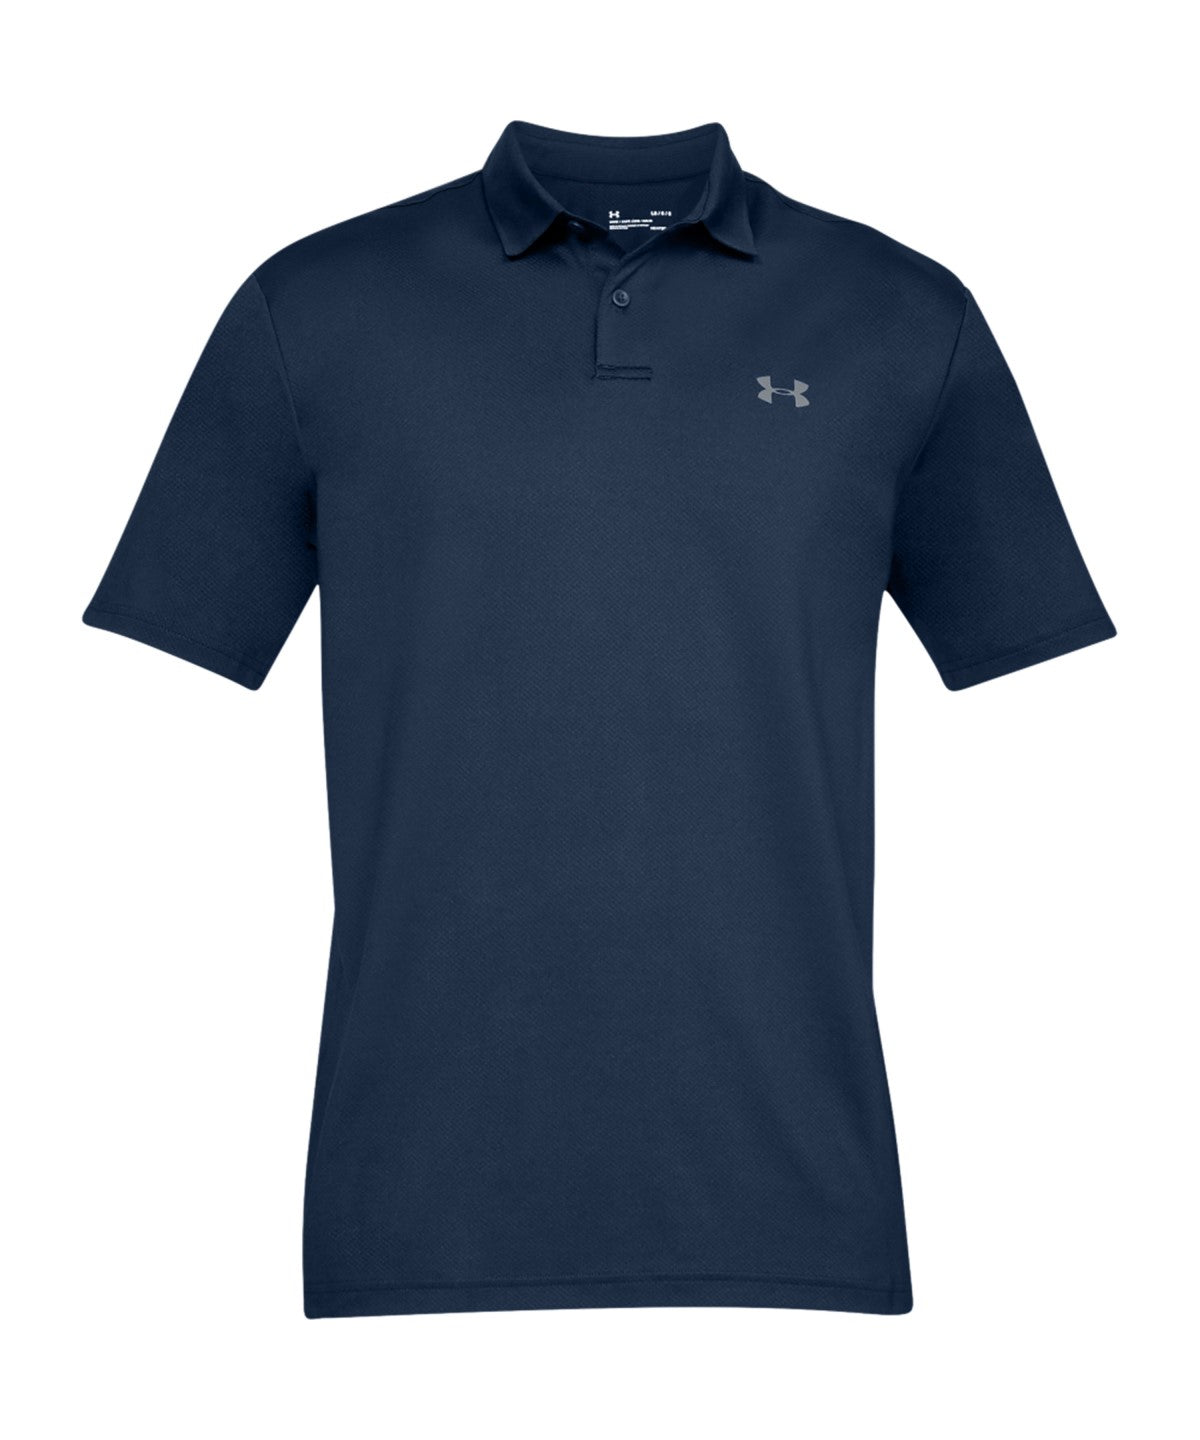 Under Armour Performance Textured Polo Academy/Pitch Grey – Scattee